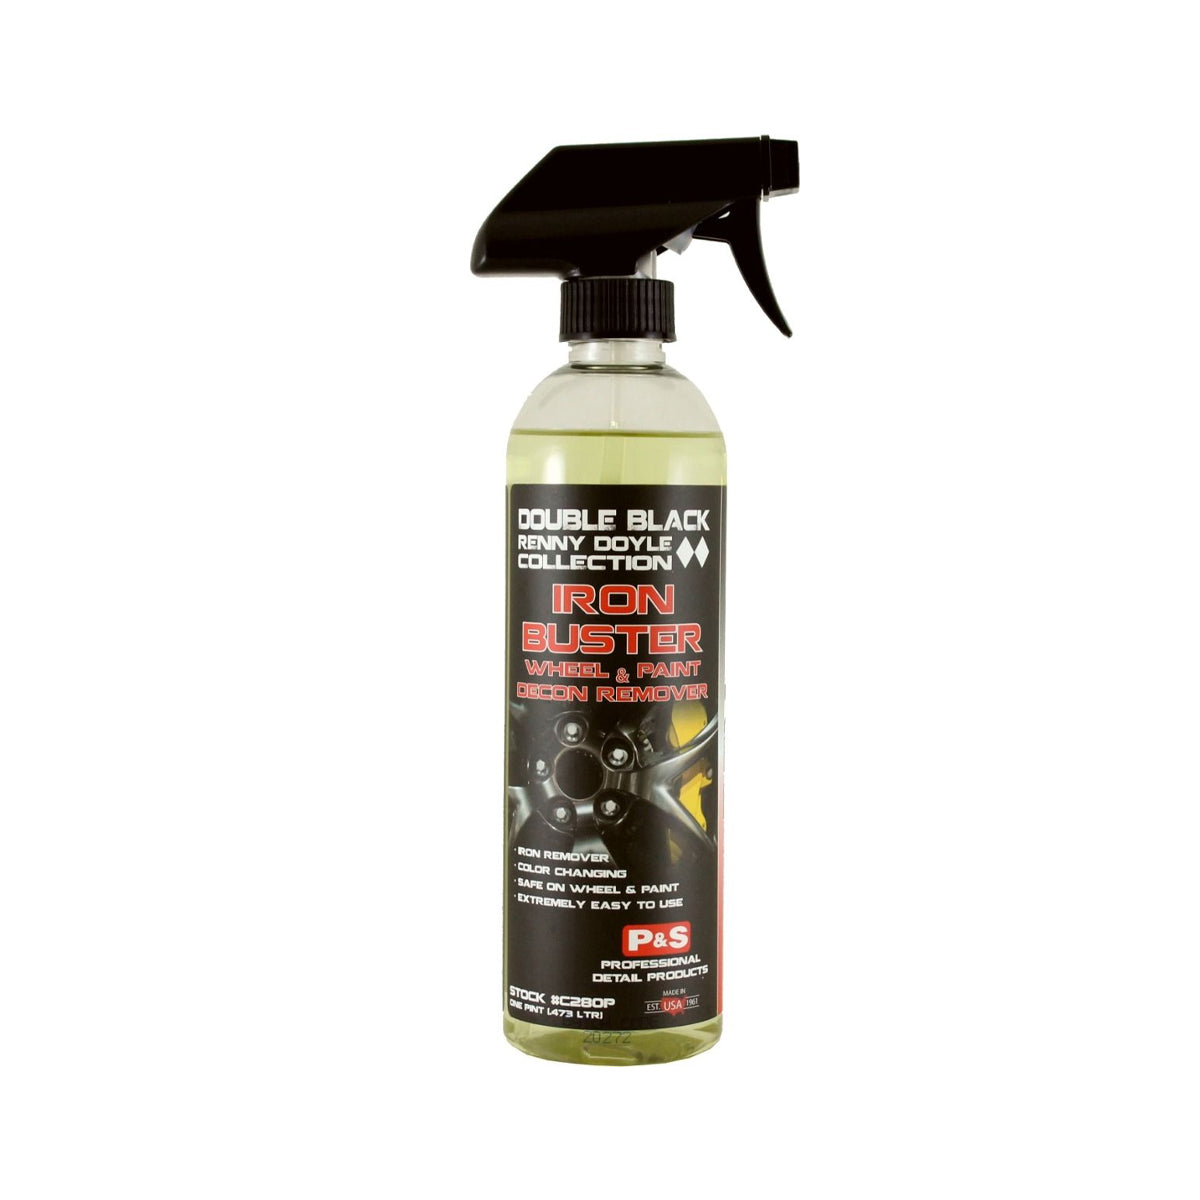 P&S Iron Buster Wheel & Paint Decon Remover 